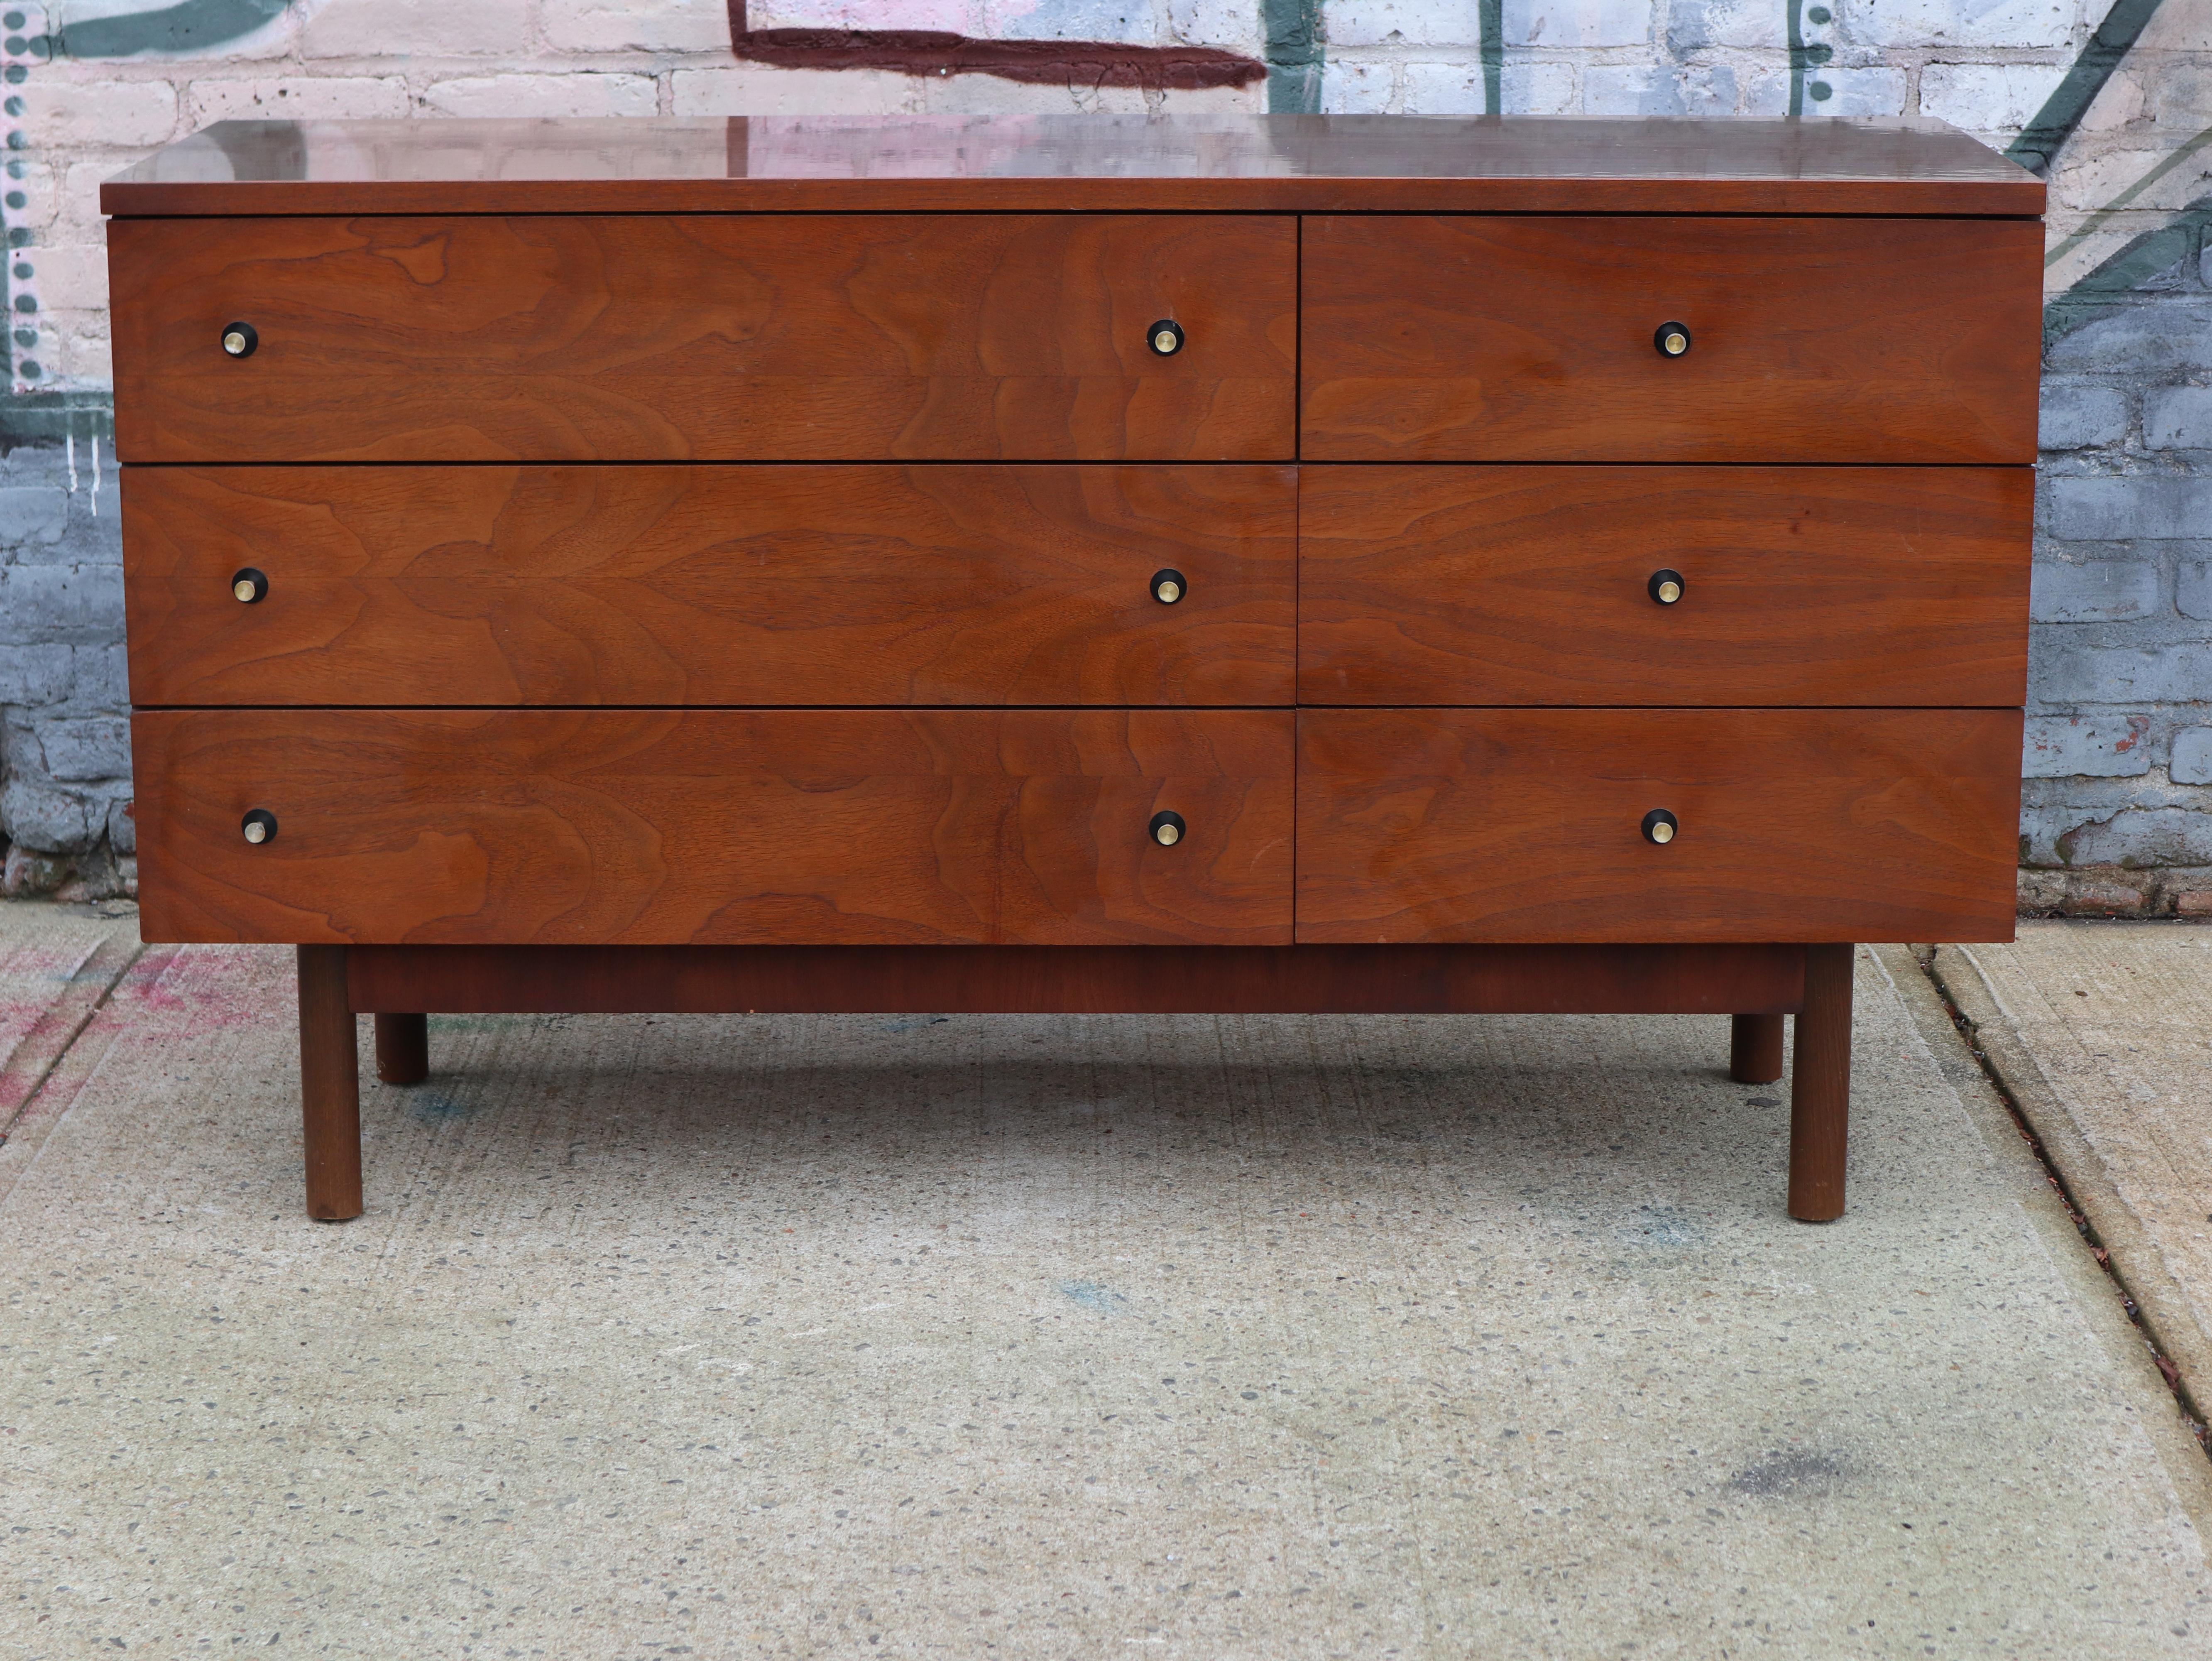 Beautiful walnut dresser by Stanley Furniture Company. Solid build, very sturdy. Signed inside drawer. Walnut exterior on rounded dowel legs. Laminate walnut grain top. In great condition with original metal pulls. Perfect for several uses including